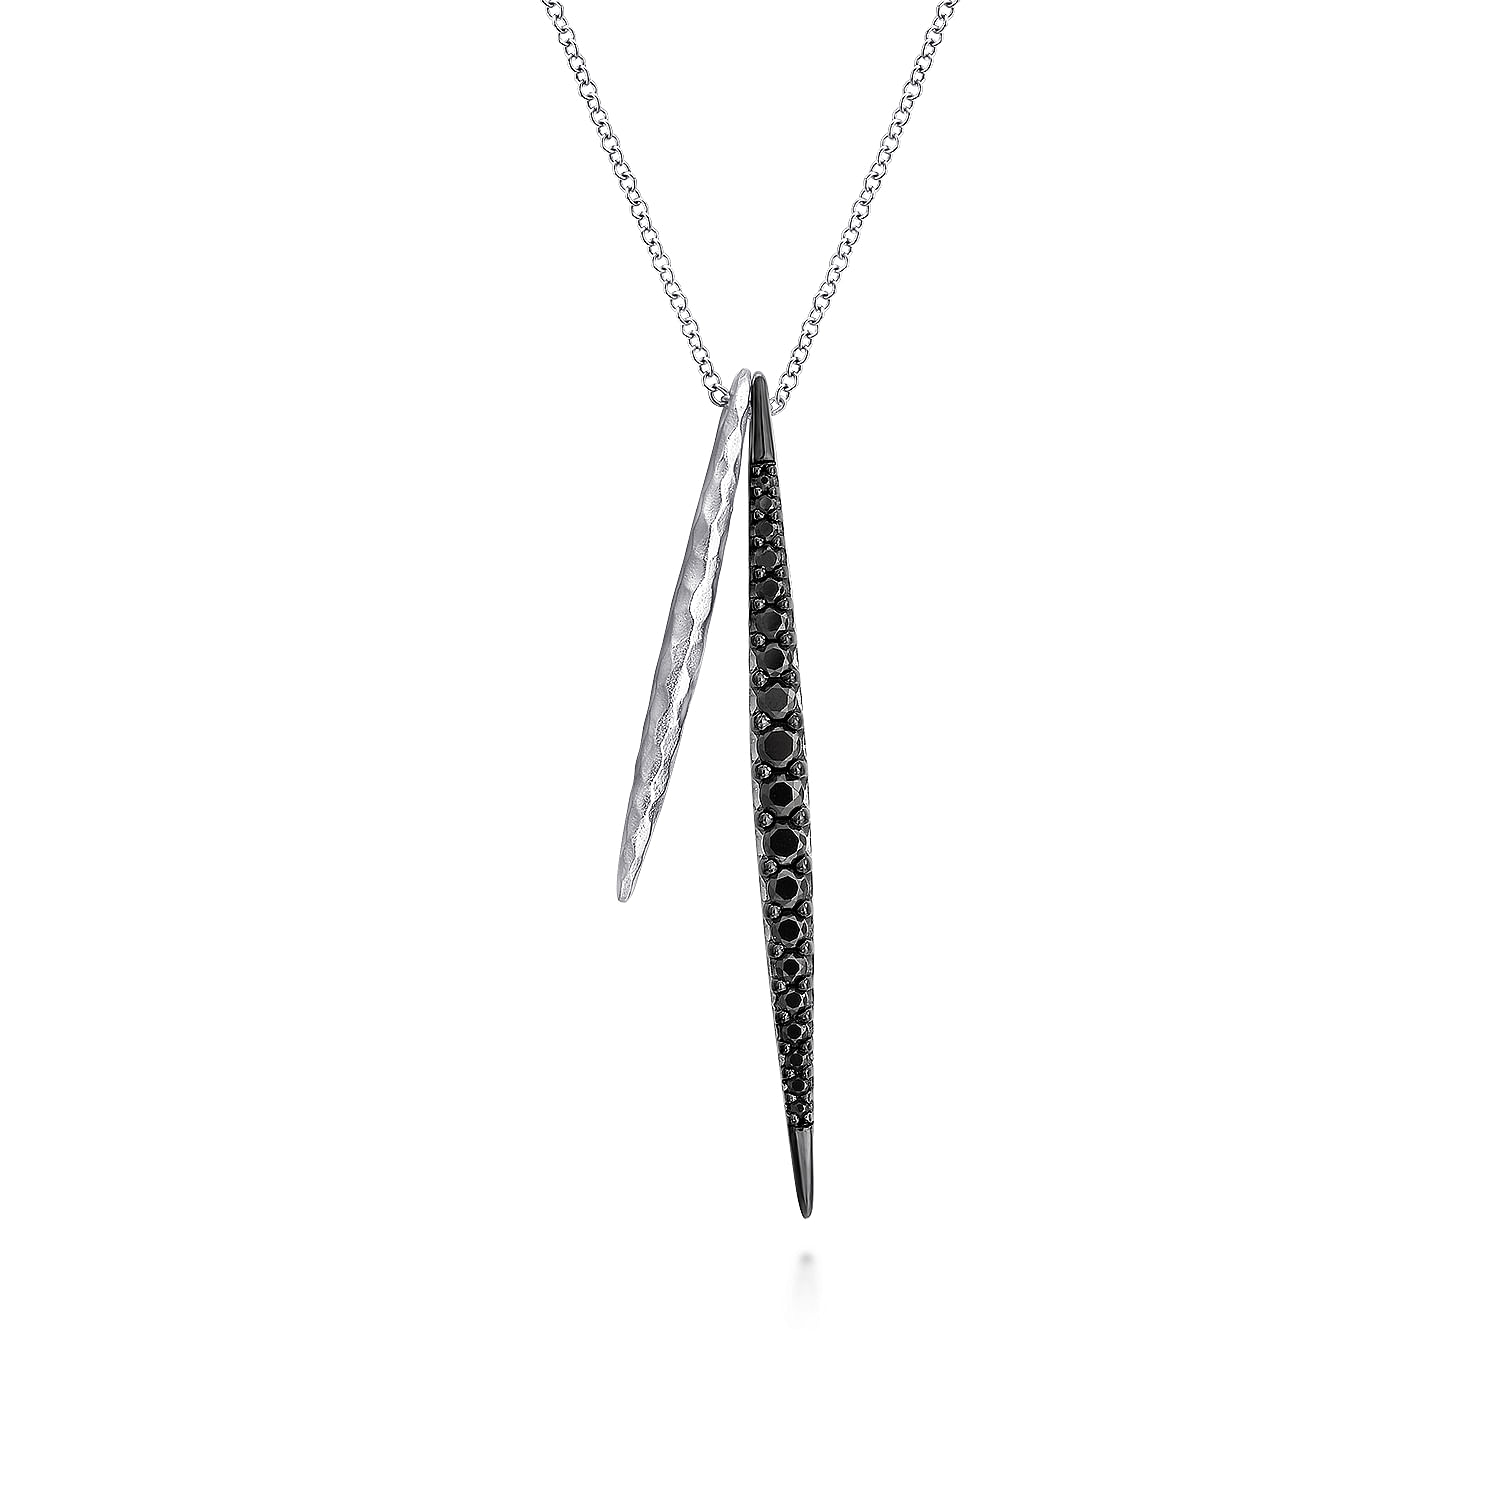 25 inch Hammered 925 Sterling Silver and Black Spinel Double Spear Necklace